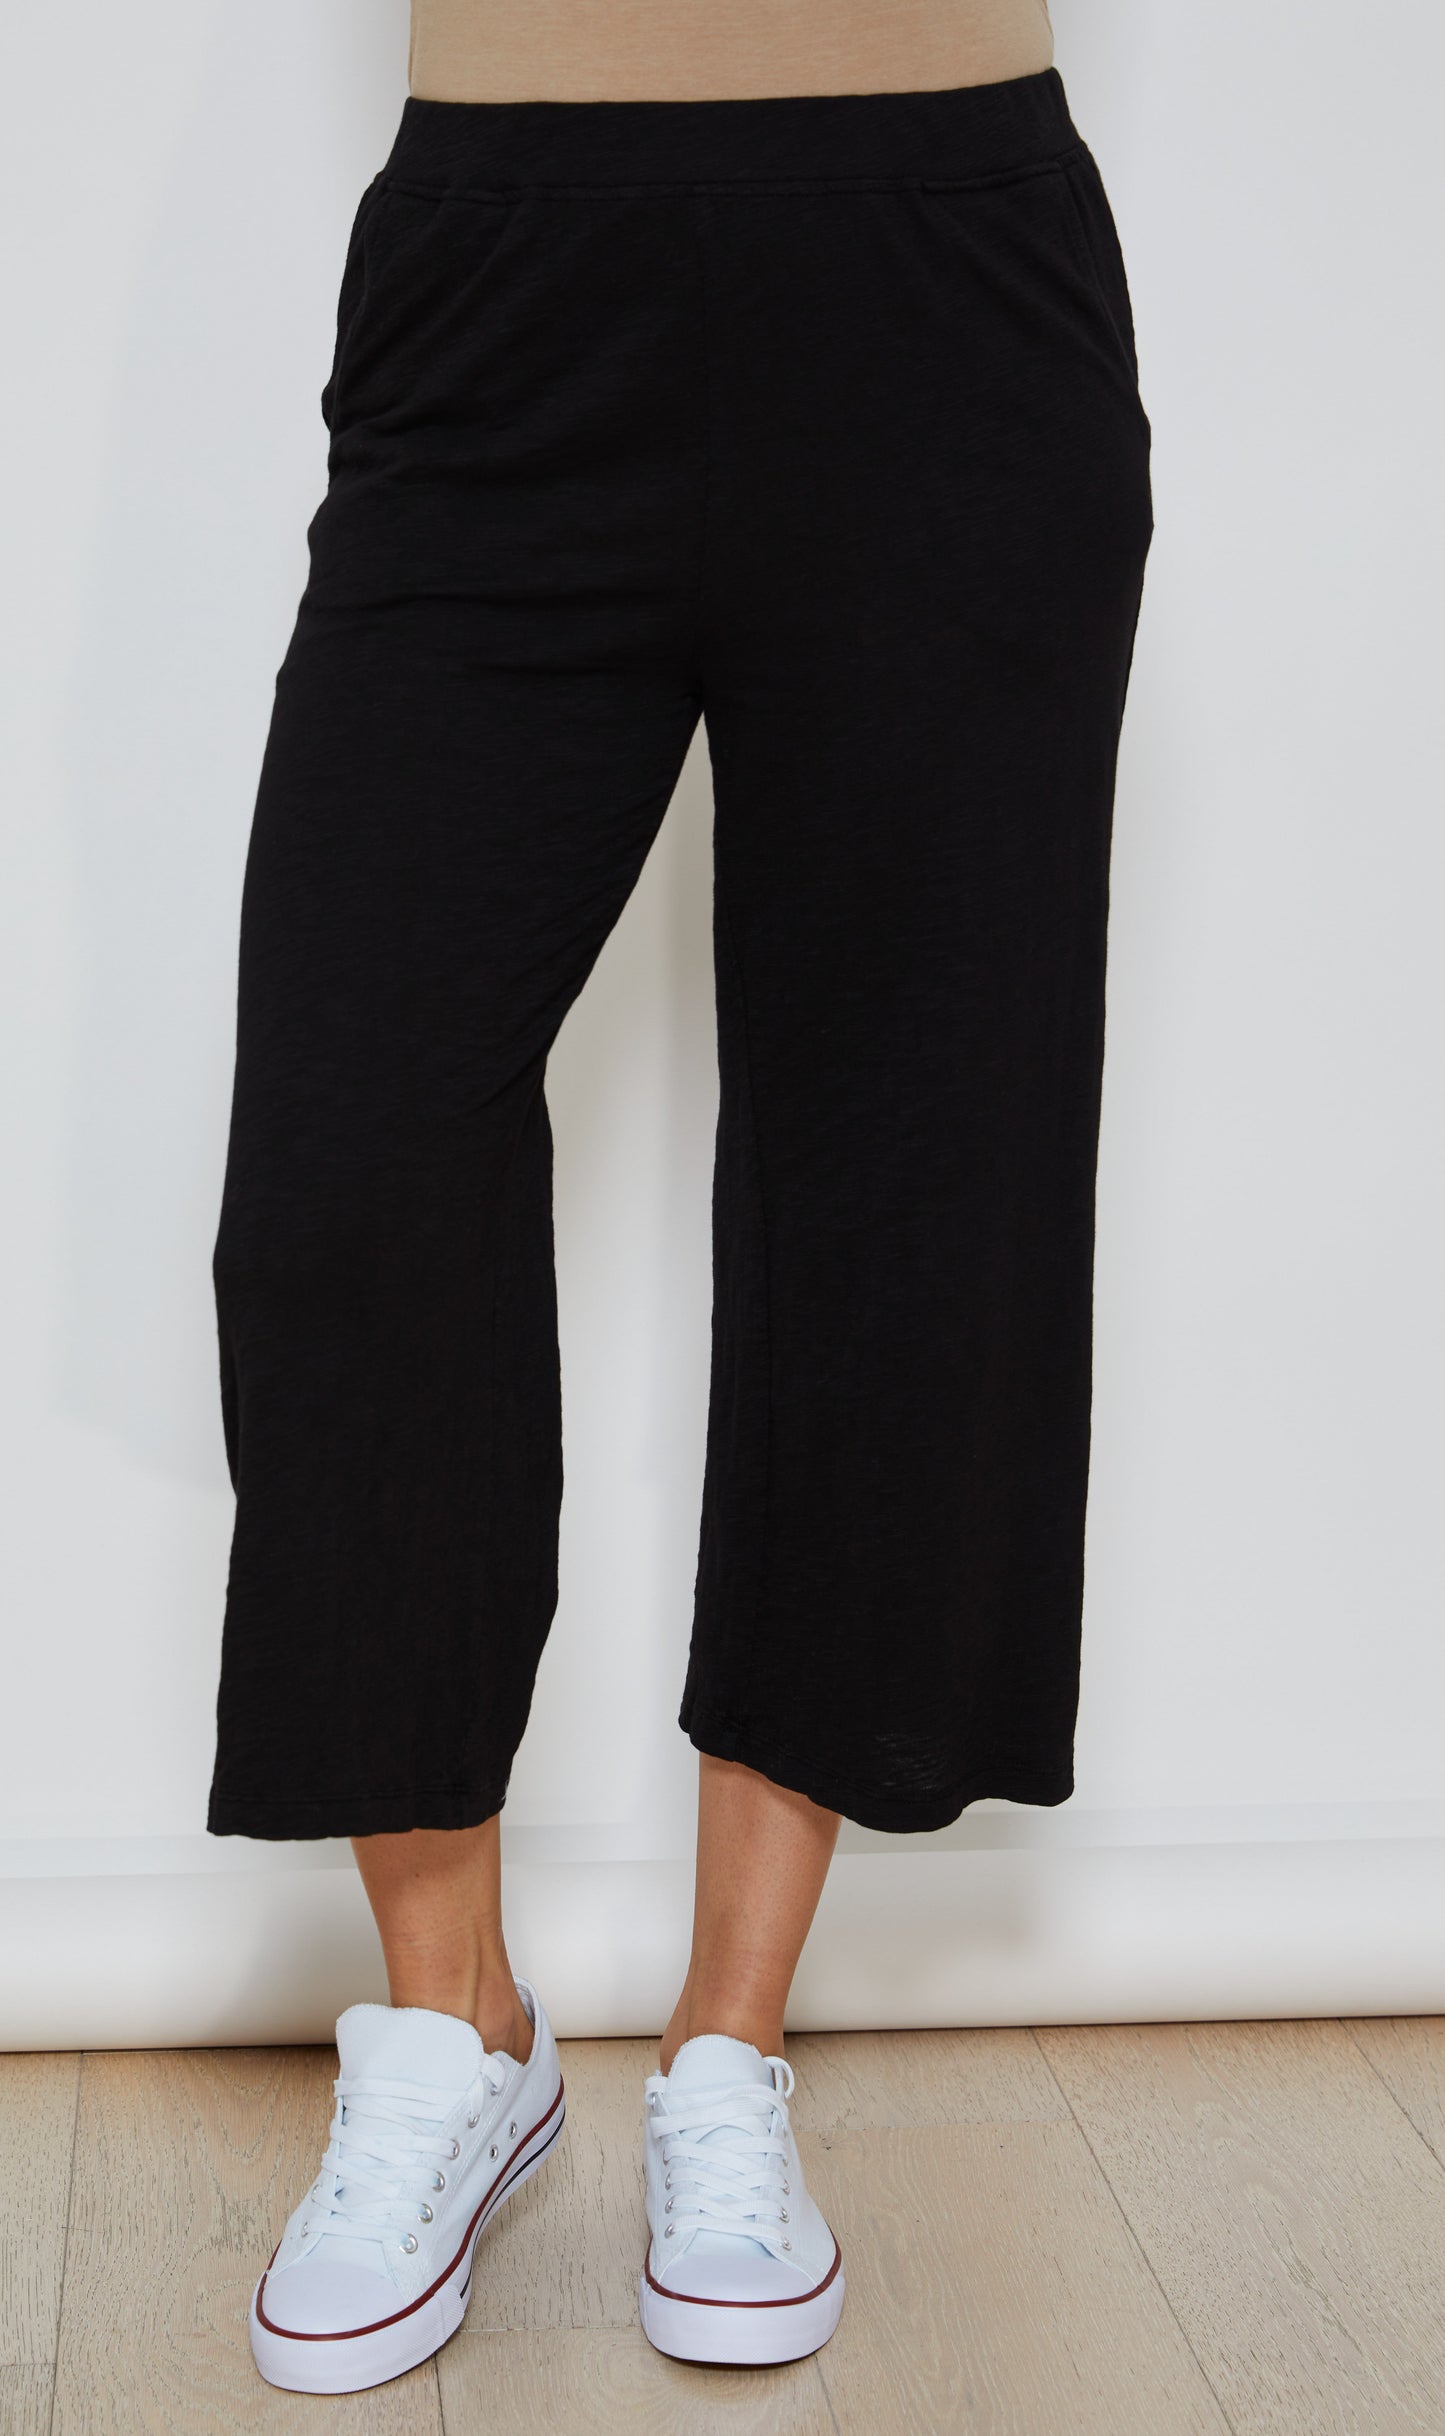 Wide Leg Cropped Pants in navy licorice by Mododoc